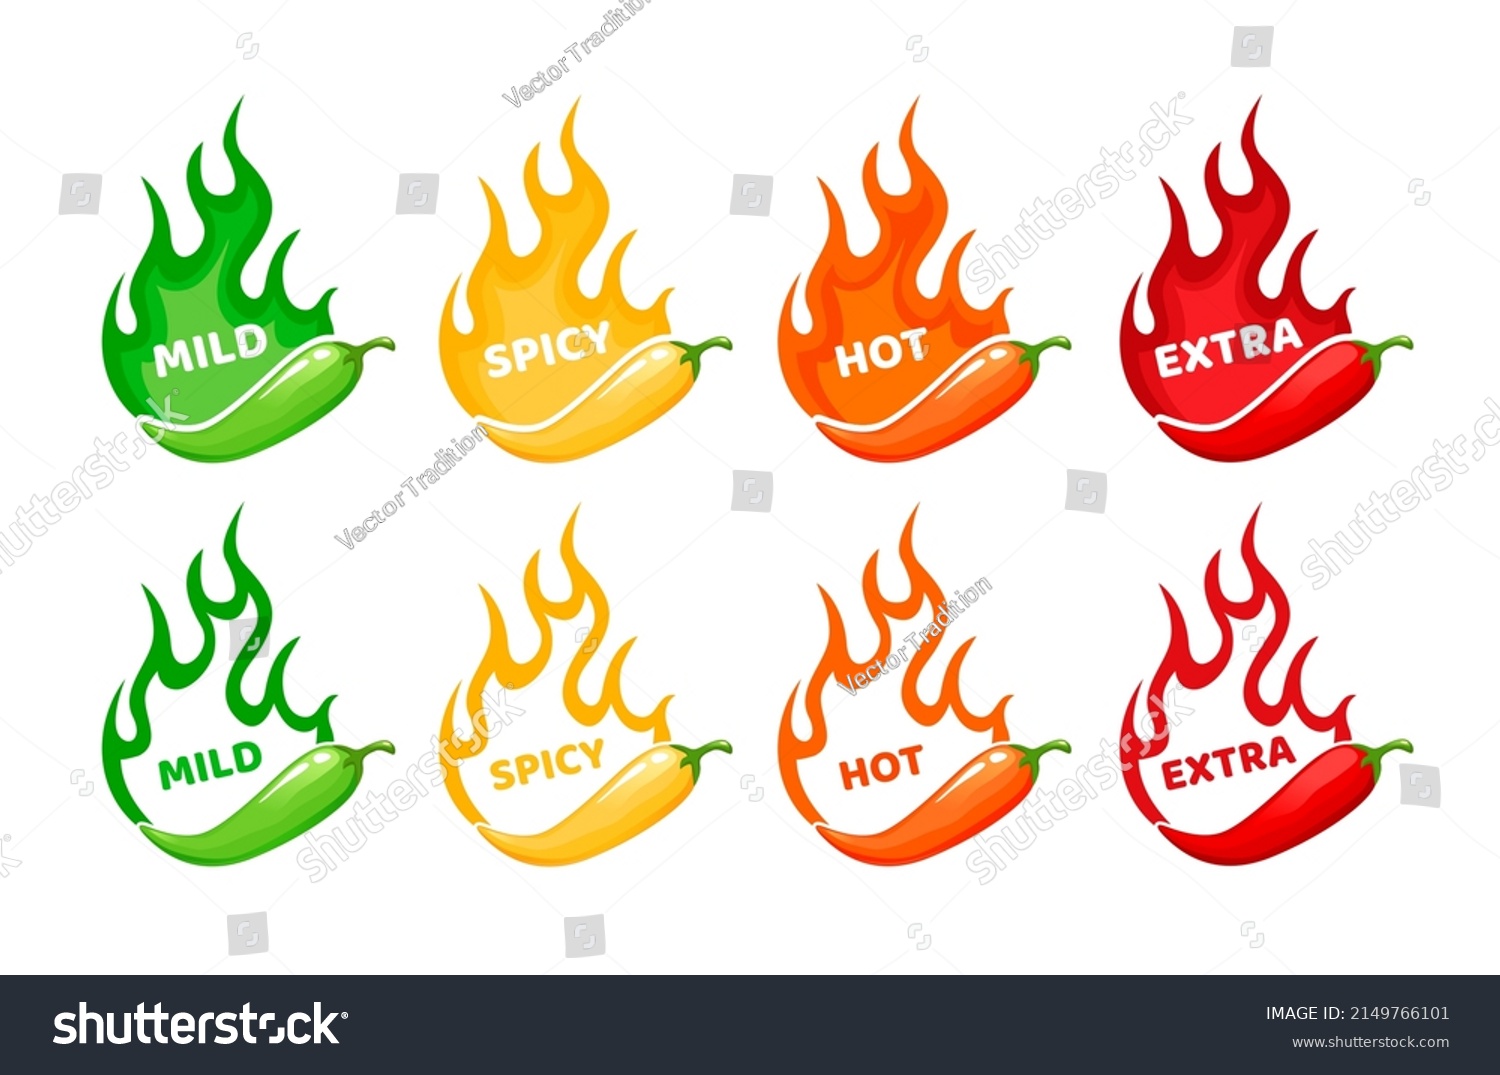 Hot spicy level labels, fire flames and red peppers symbols of mild, medium and extra hot, vector scale. Spicy food taste level icons with burning flame of chili pepper, jalapeno or Tabasco sauce #2149766101